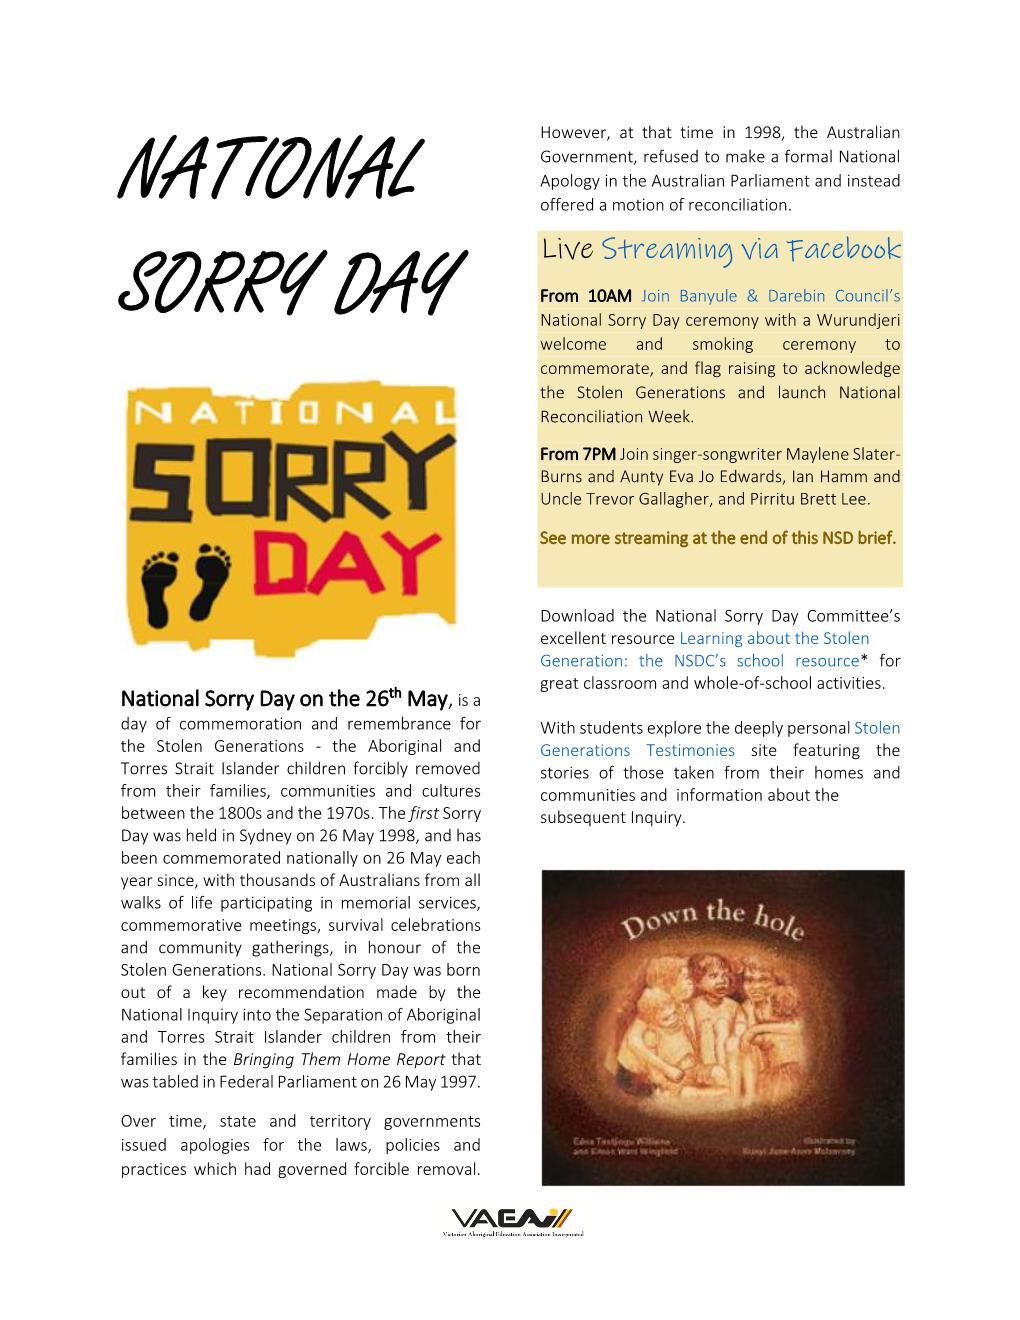 National Sorry